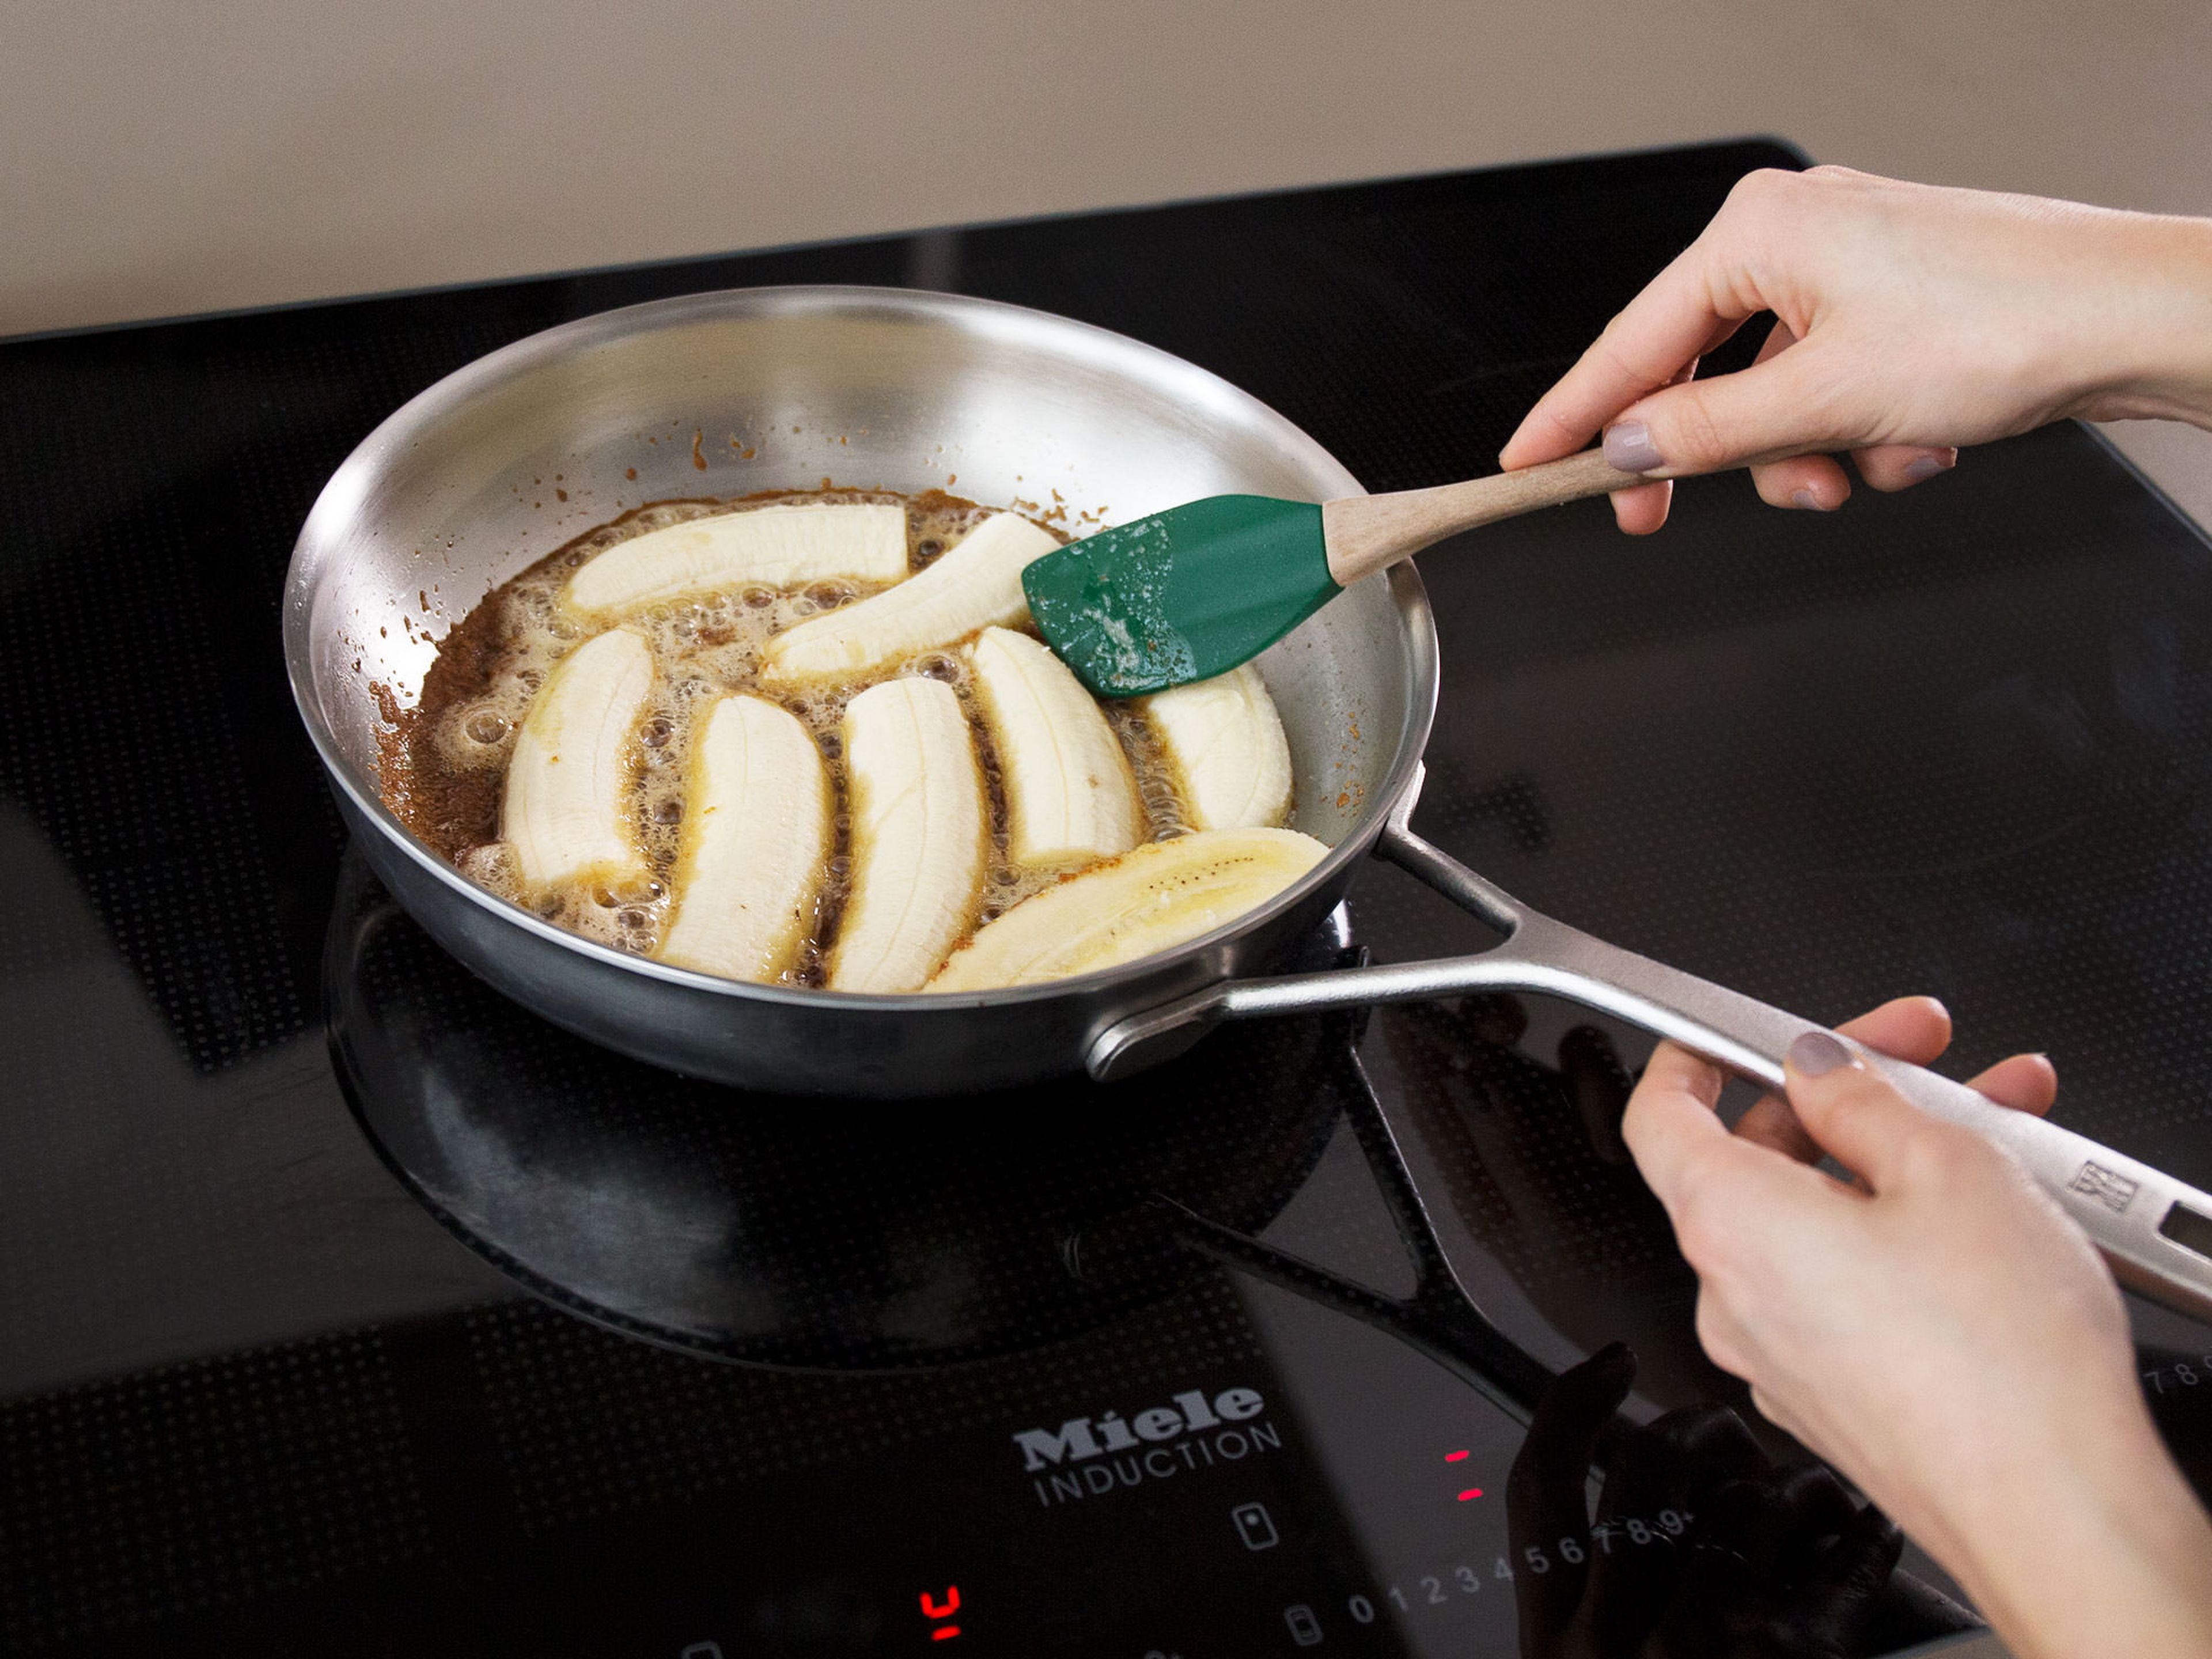 In the same frying pan, melt butter and brown sugar over medium heat. Meanwhile, peel the bananas, slice lengthwise, and then halve. Add the bananas to the pan and sauté for approx. 1 min. on each side, or until lightly caramelized. Sprinkle with cinnamon and remove pan from the heat.